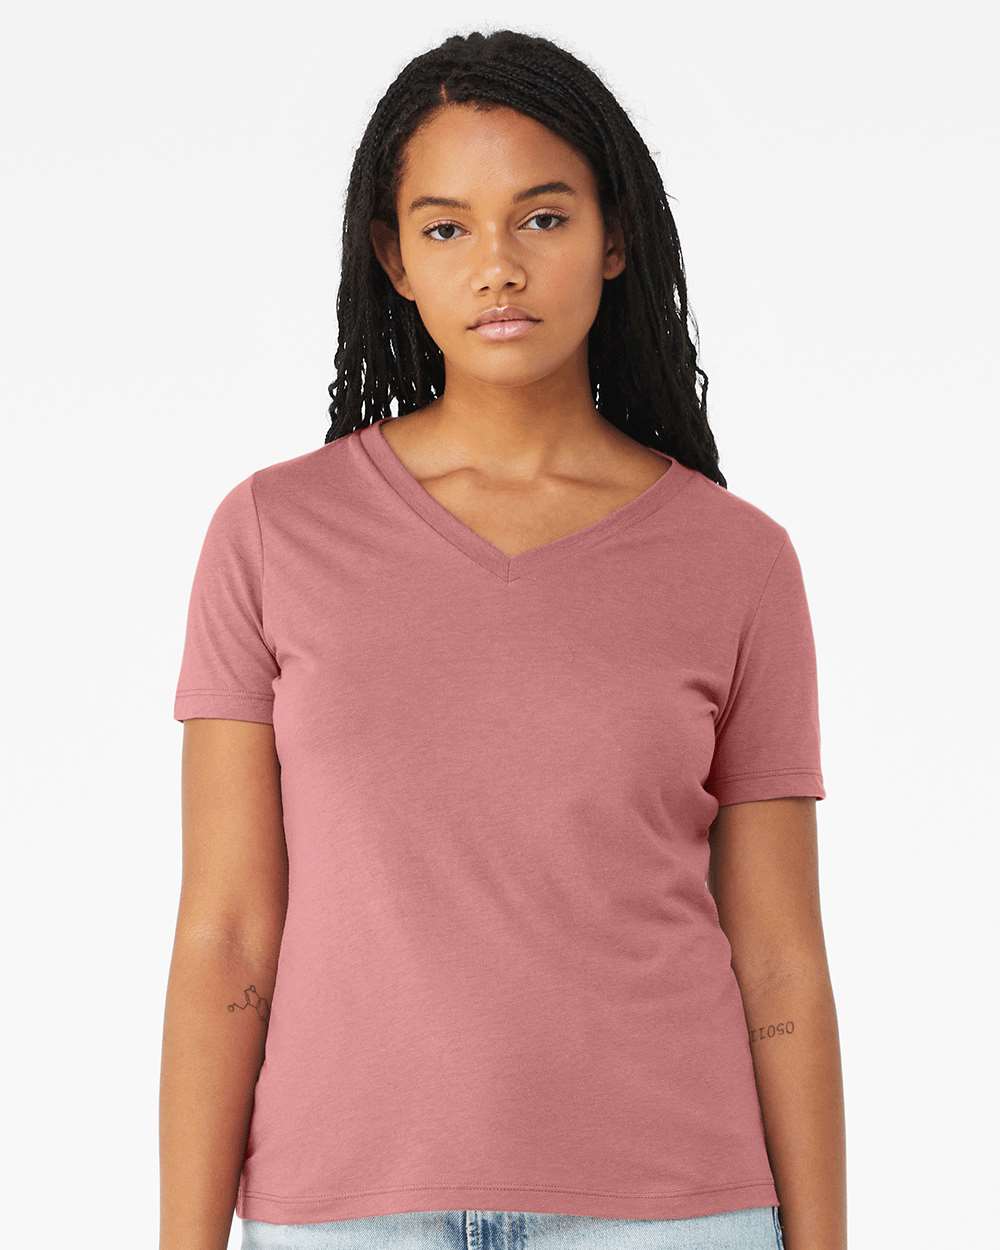 BELLA + CANVAS - Women's Relaxed Triblend Short Sleeve V-Neck Tee - 6415